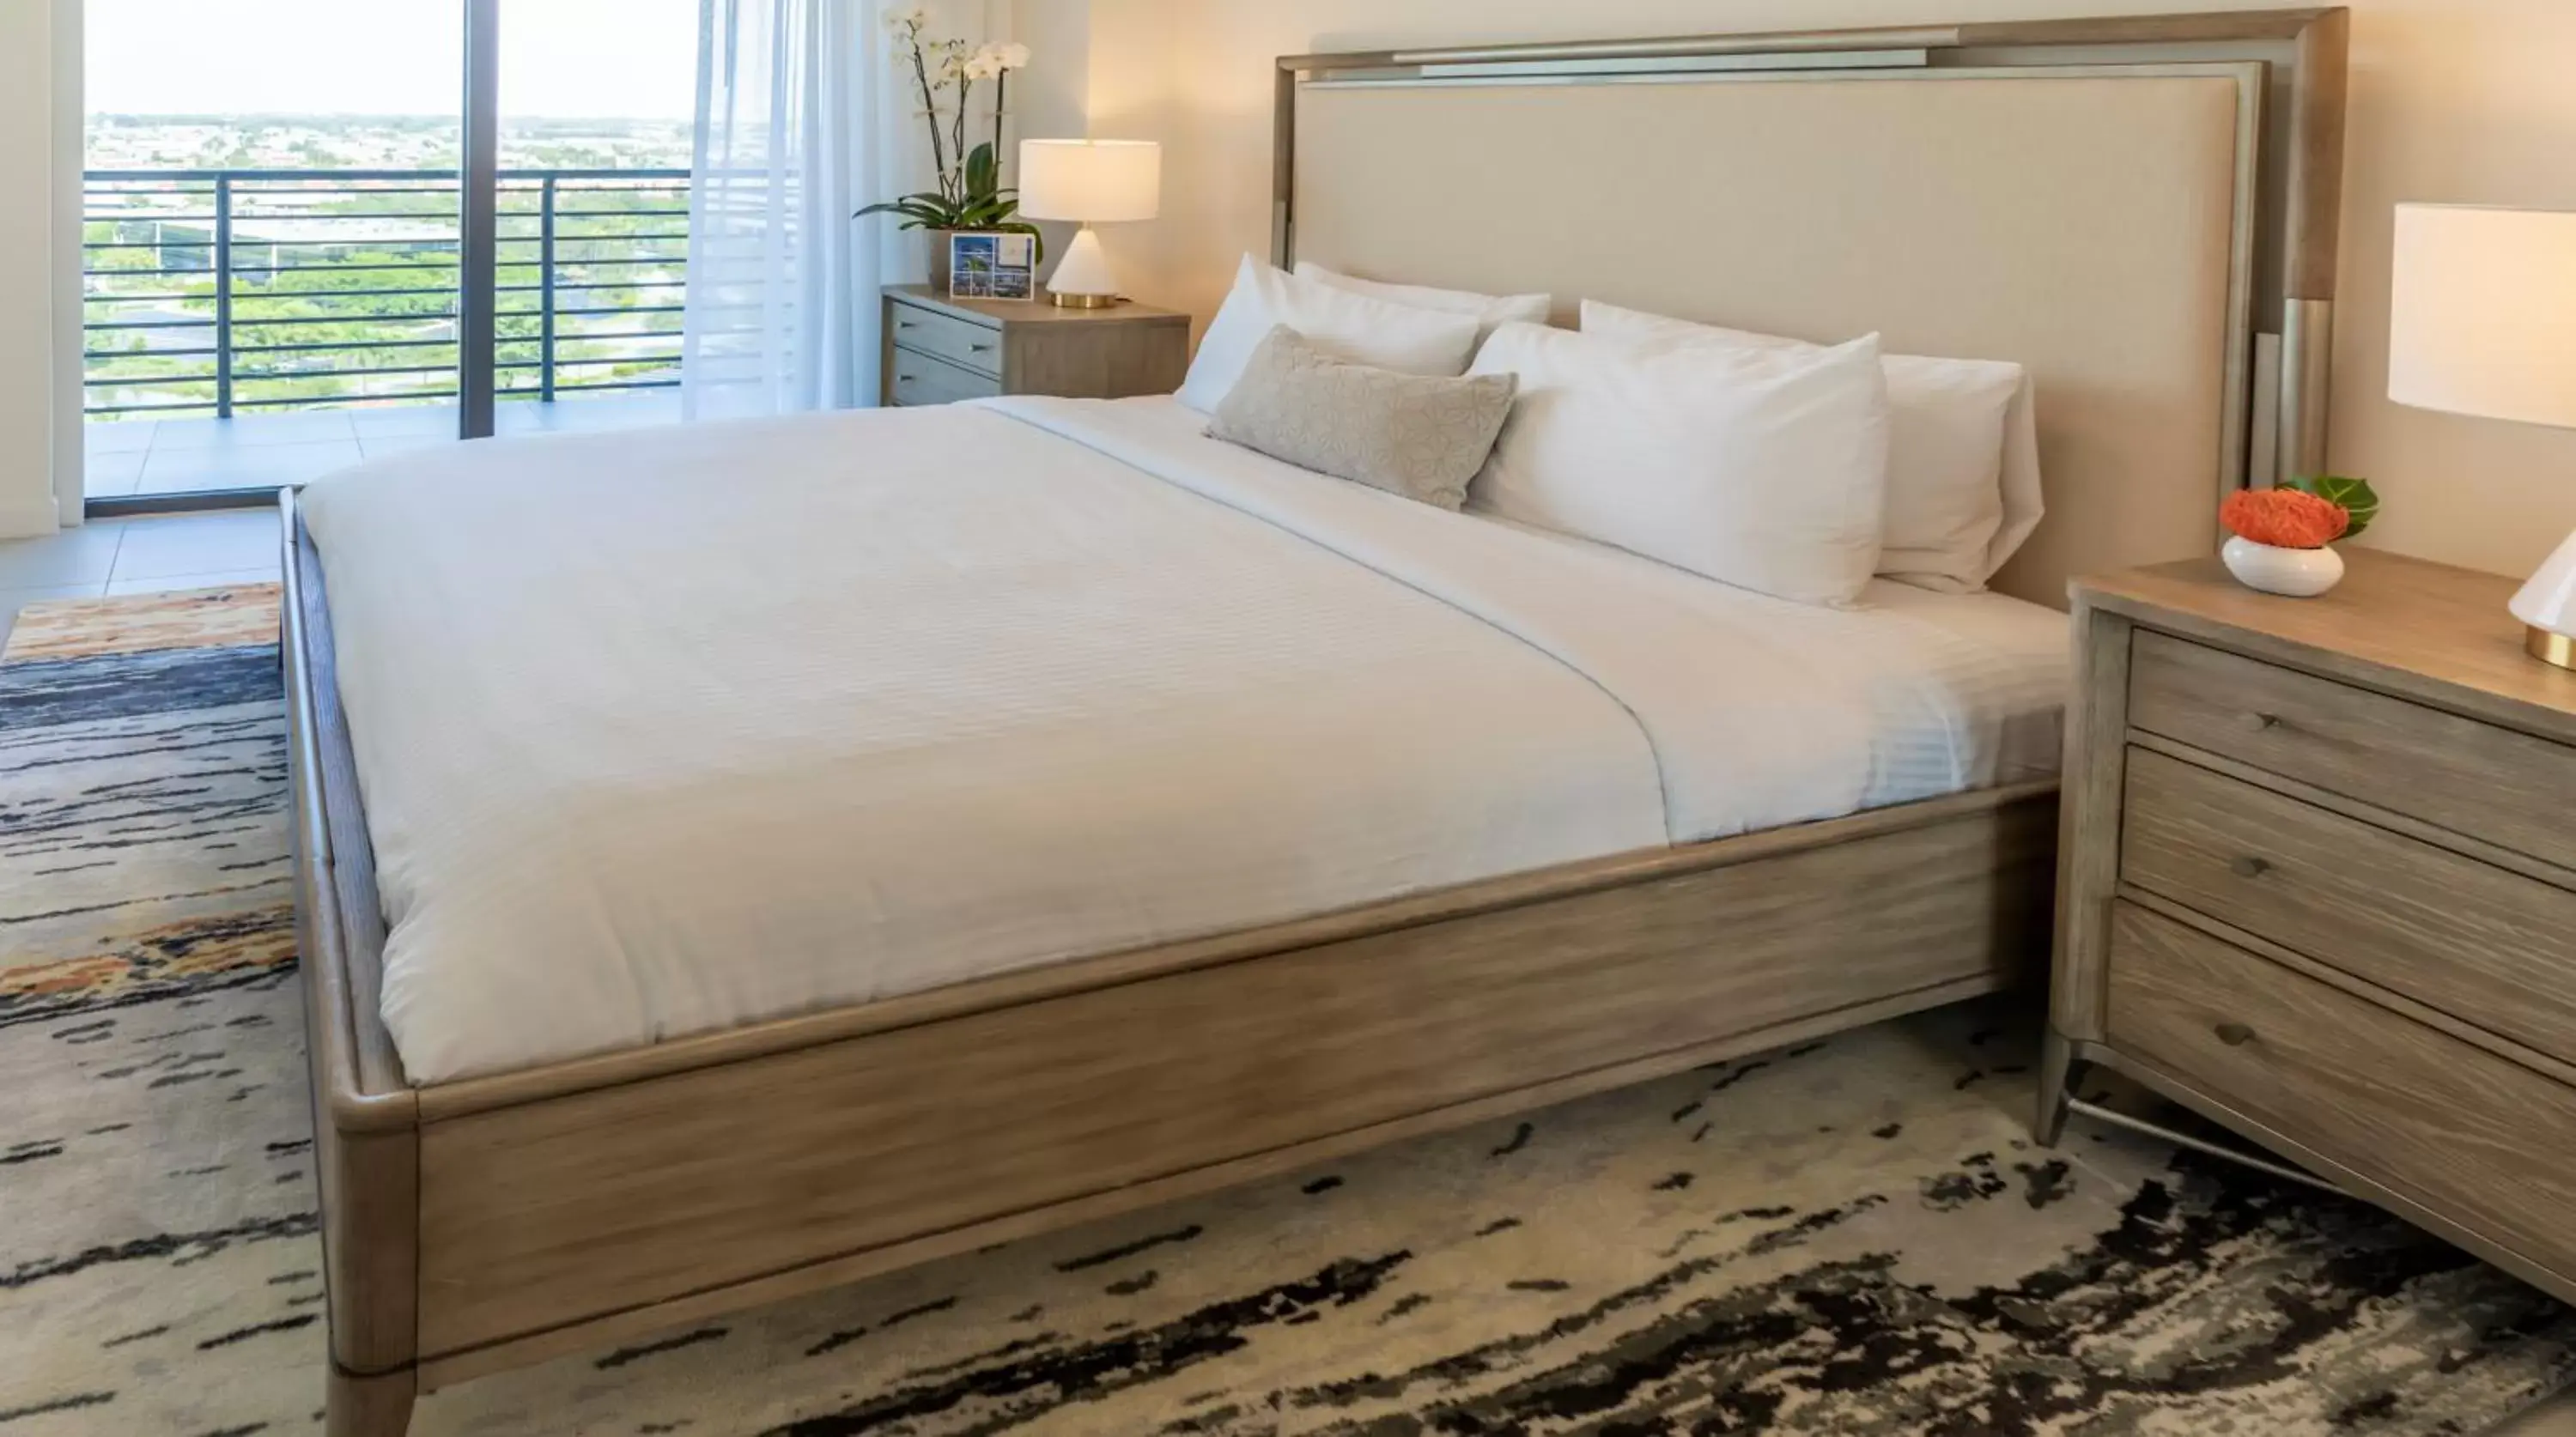 Bed in Provident Grand Luxury Short-Term Residences